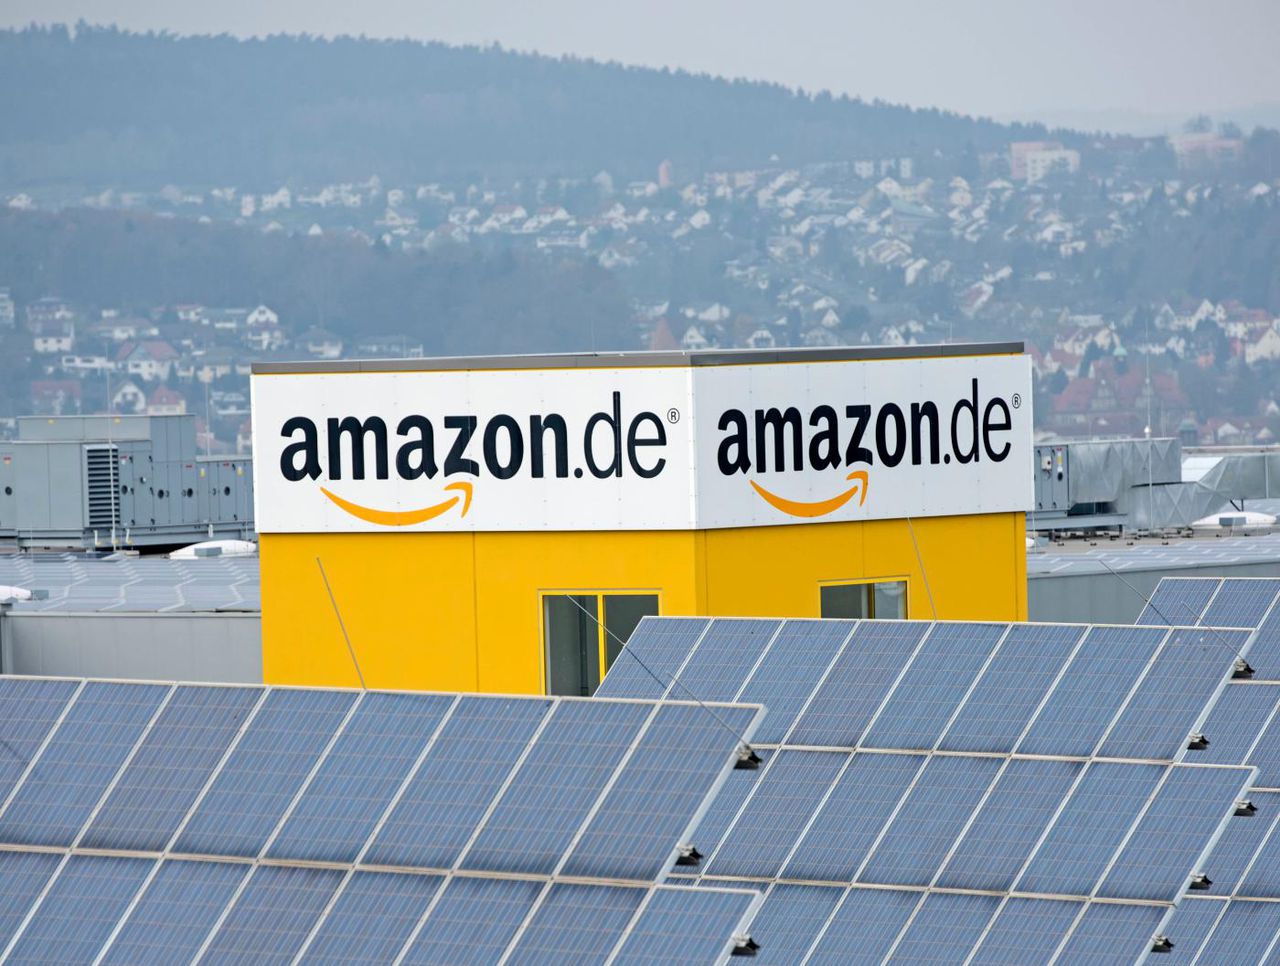 Amazon eyeing expansion in Germany, country executive reveals. Image via Amazon.